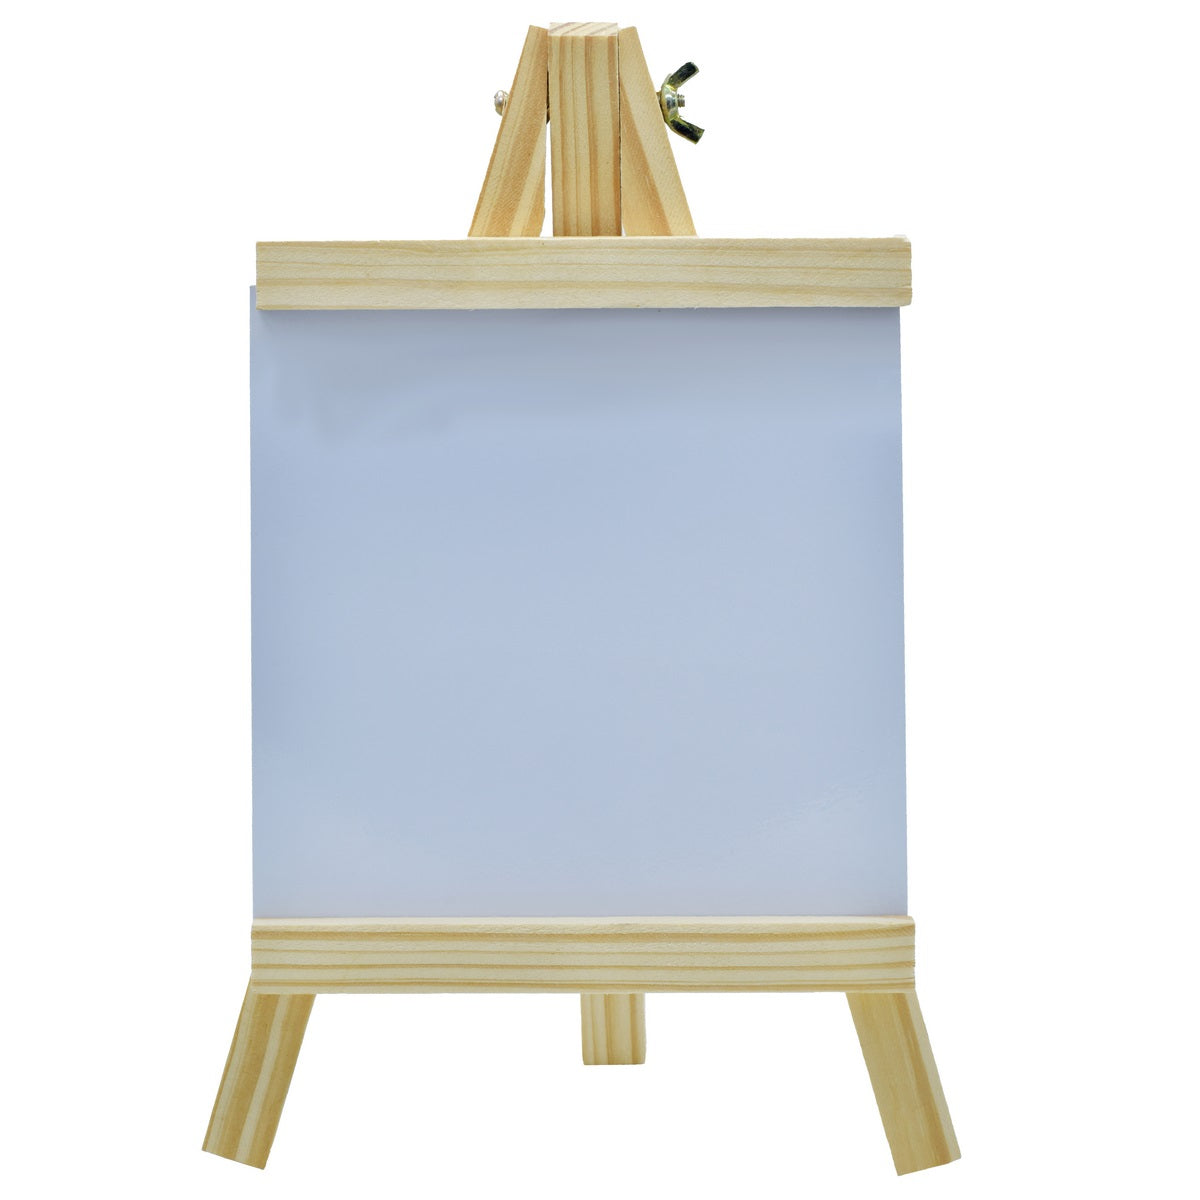 jags-mumbai Easel & Canvas Drawing Board With Easel Stand White (16x28) cm